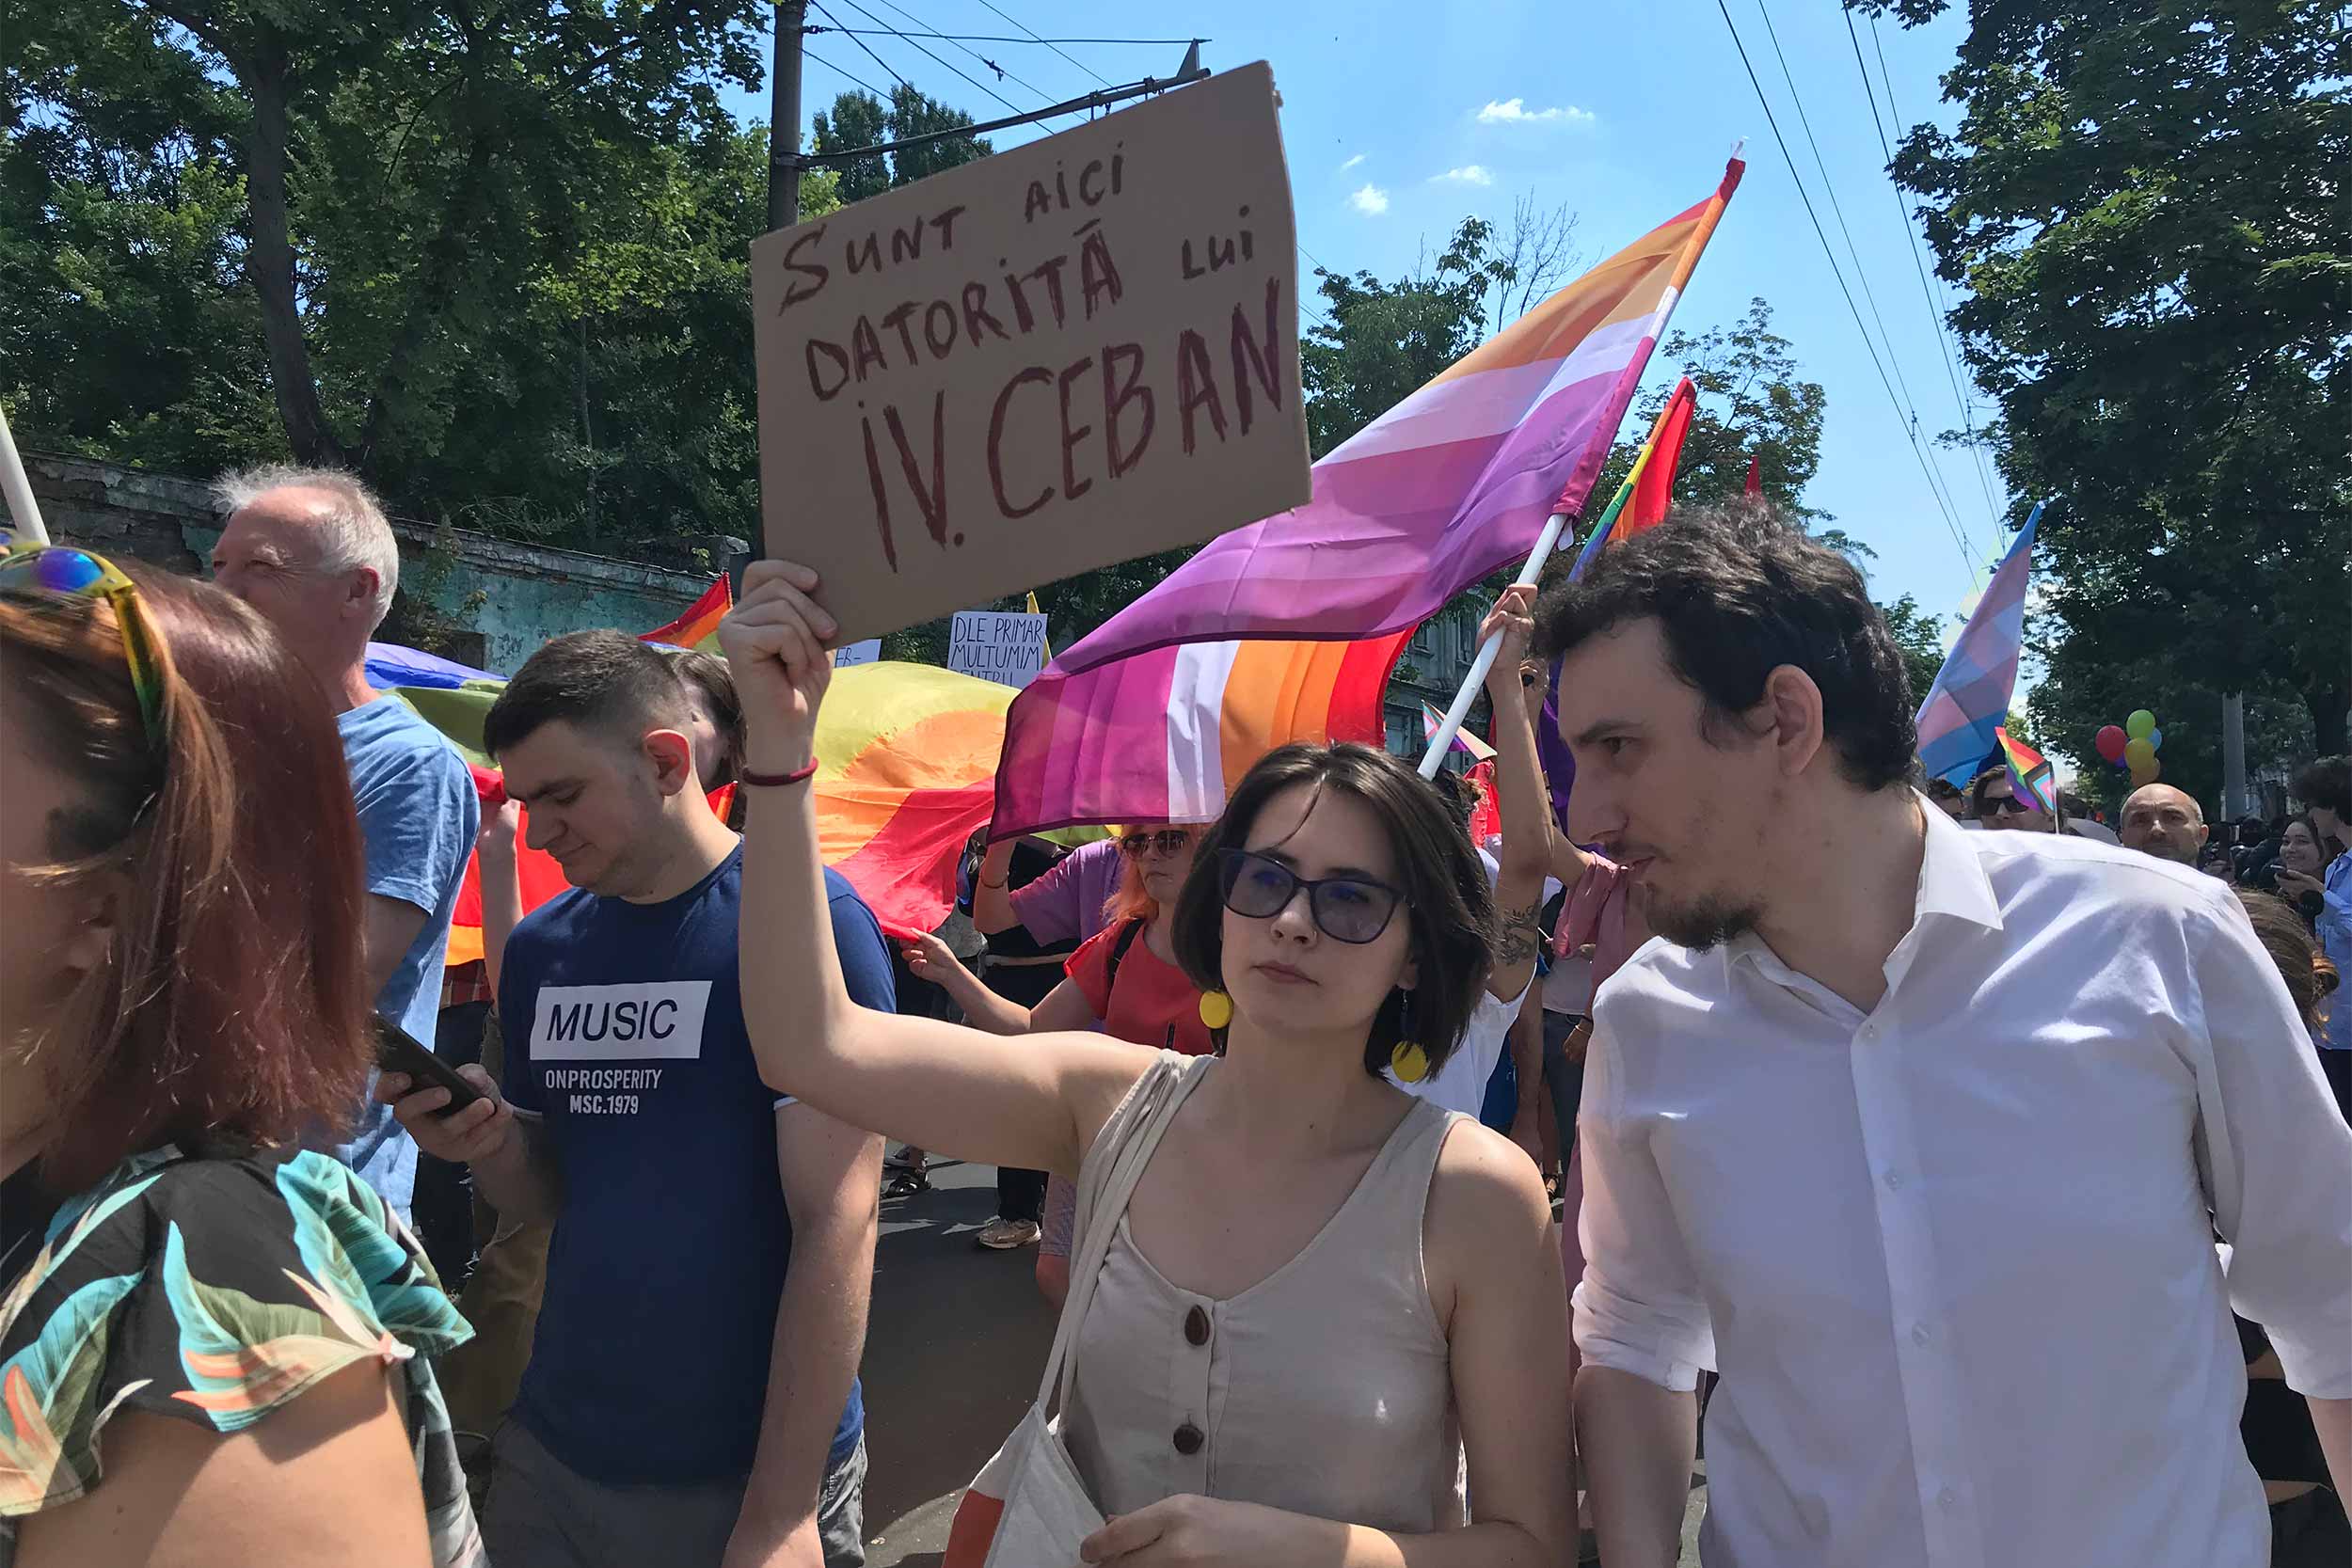 A woman holds a sign, which reads &quot;I am here because of Ion Ceban.&quot; Ceban is the mayor of Moldova's capital Chisinau, whose threats to ban the Pride march to go ahead, prompted several people to attend in support of the organisers and the LGBT+ community. © Aliona Ciurca